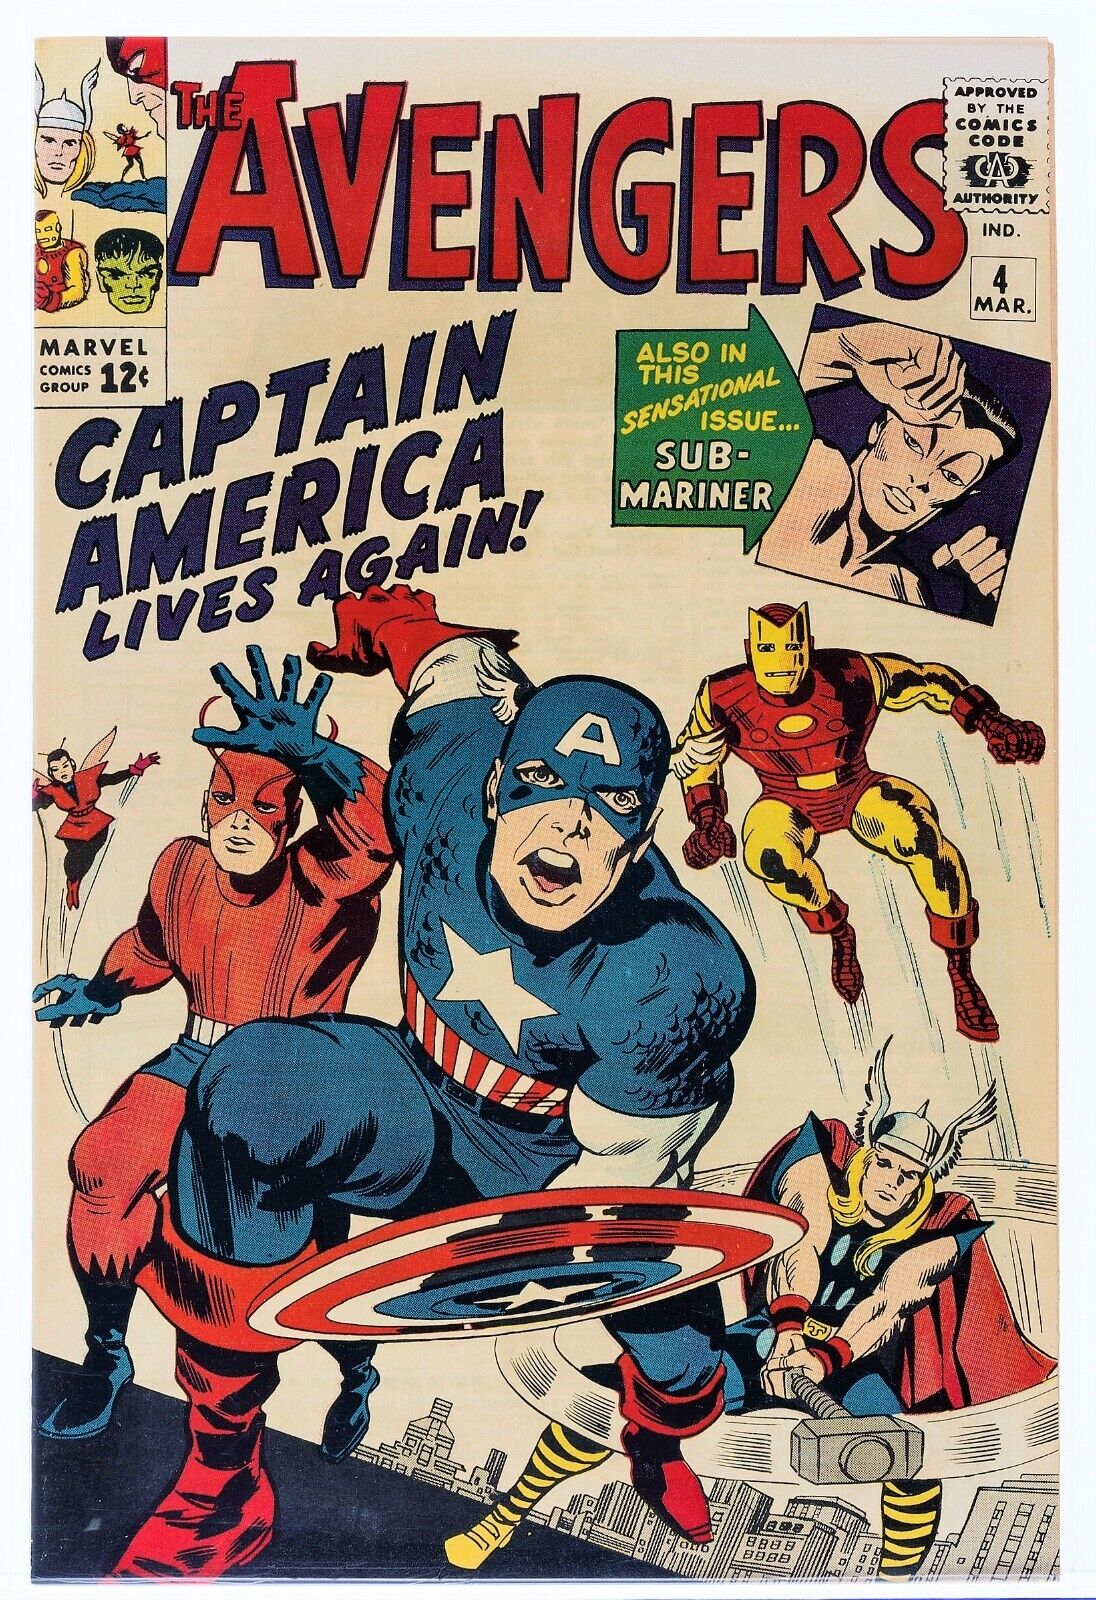 AVENGERS Collection On Disc Vintage CLASSICS Now You Can Own Every Issue